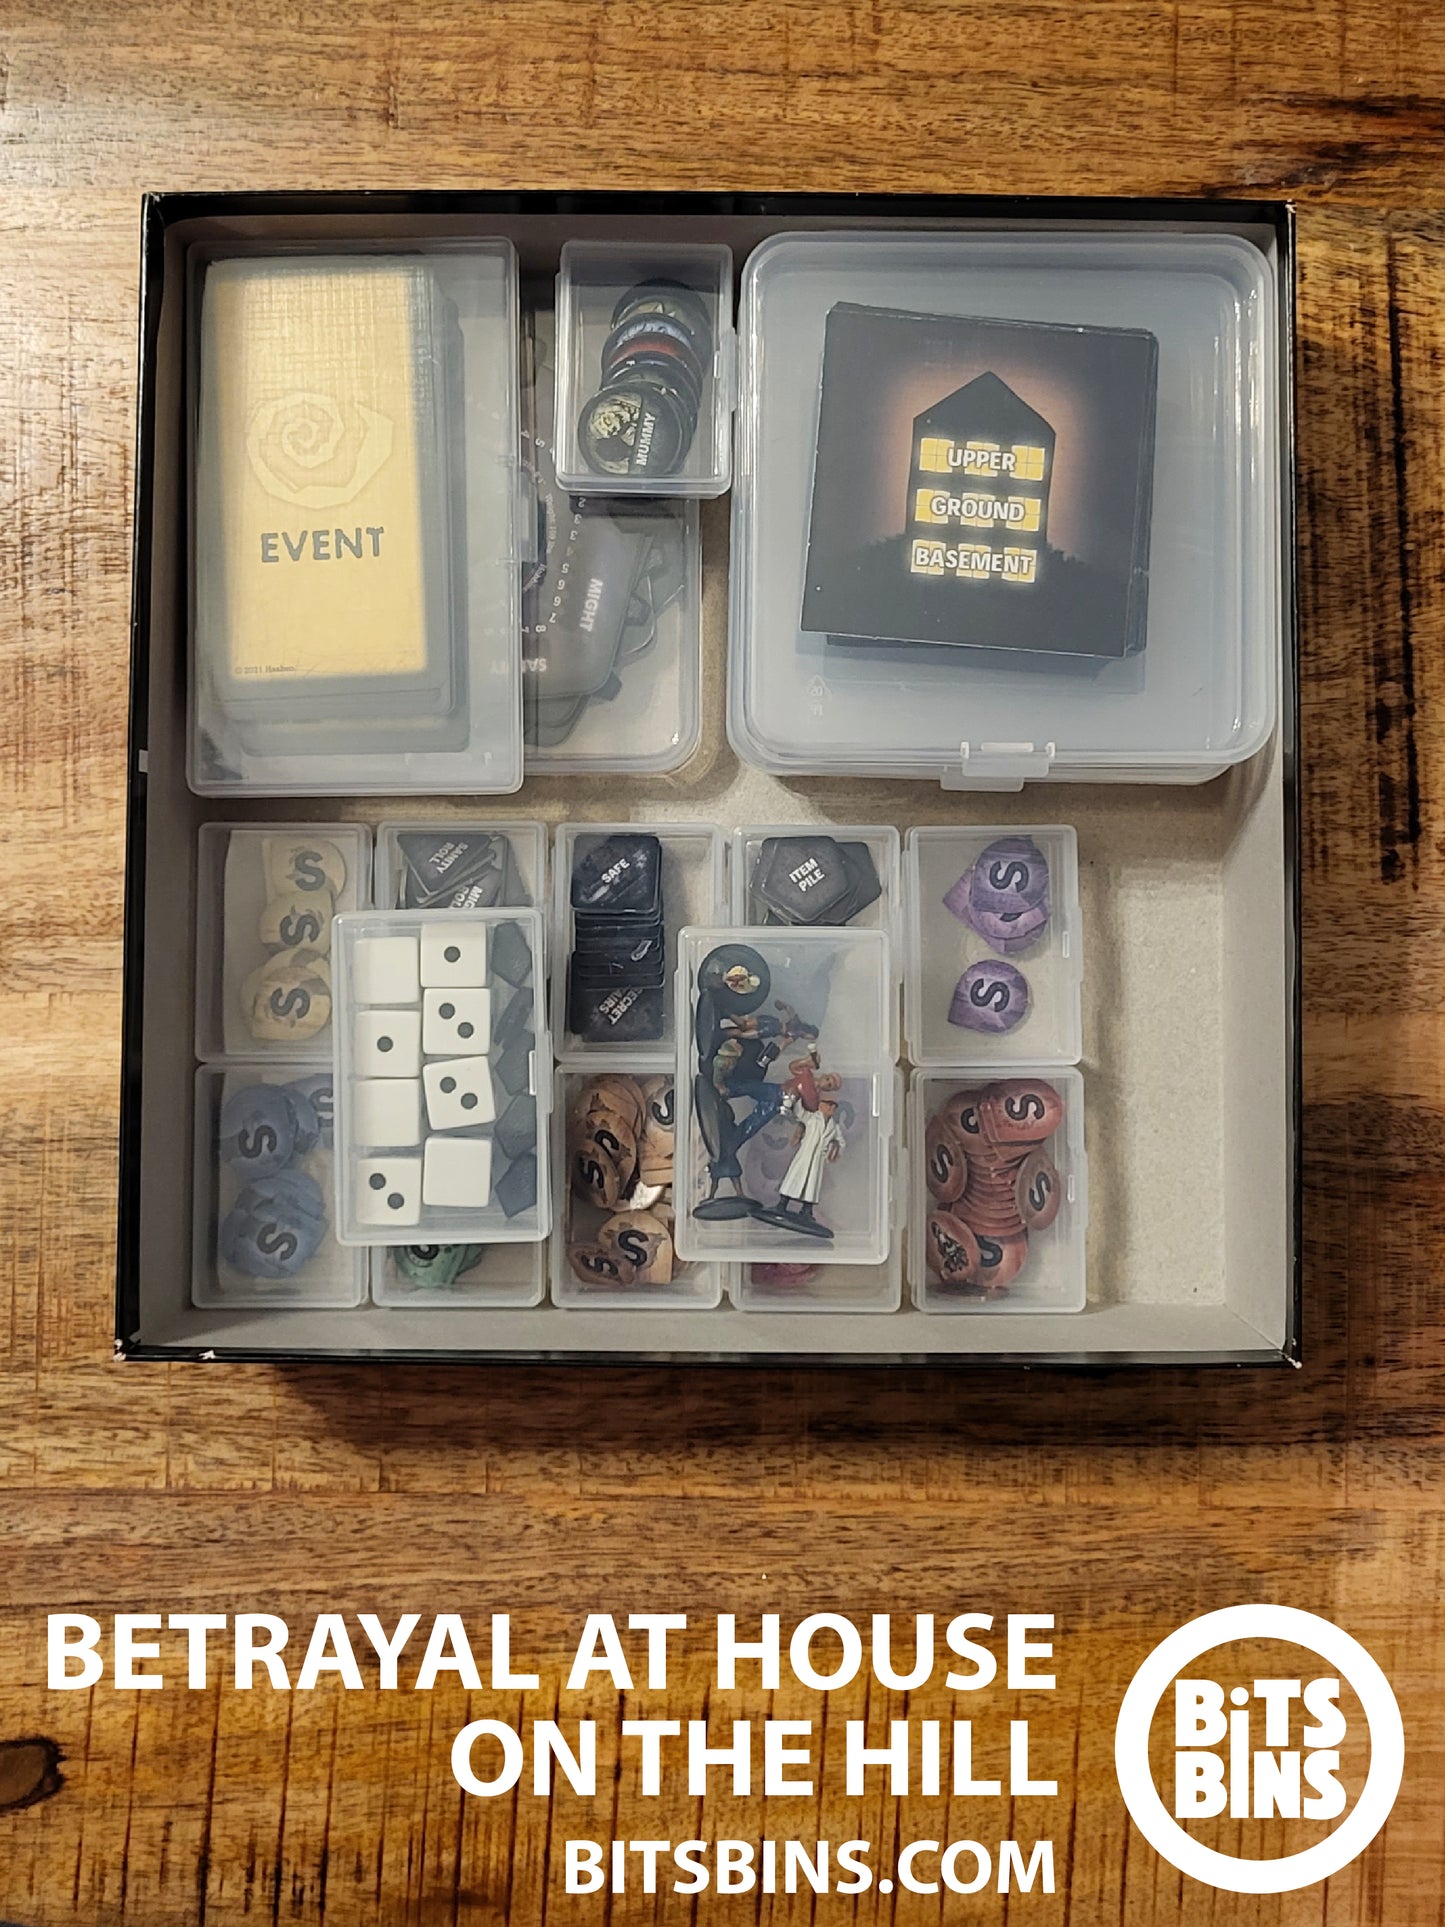 RECOMMENDED Bitsbins Betrayal at the House on the Hill - 11 Minis, 2 Originals, 4 Flat, 1 Tile